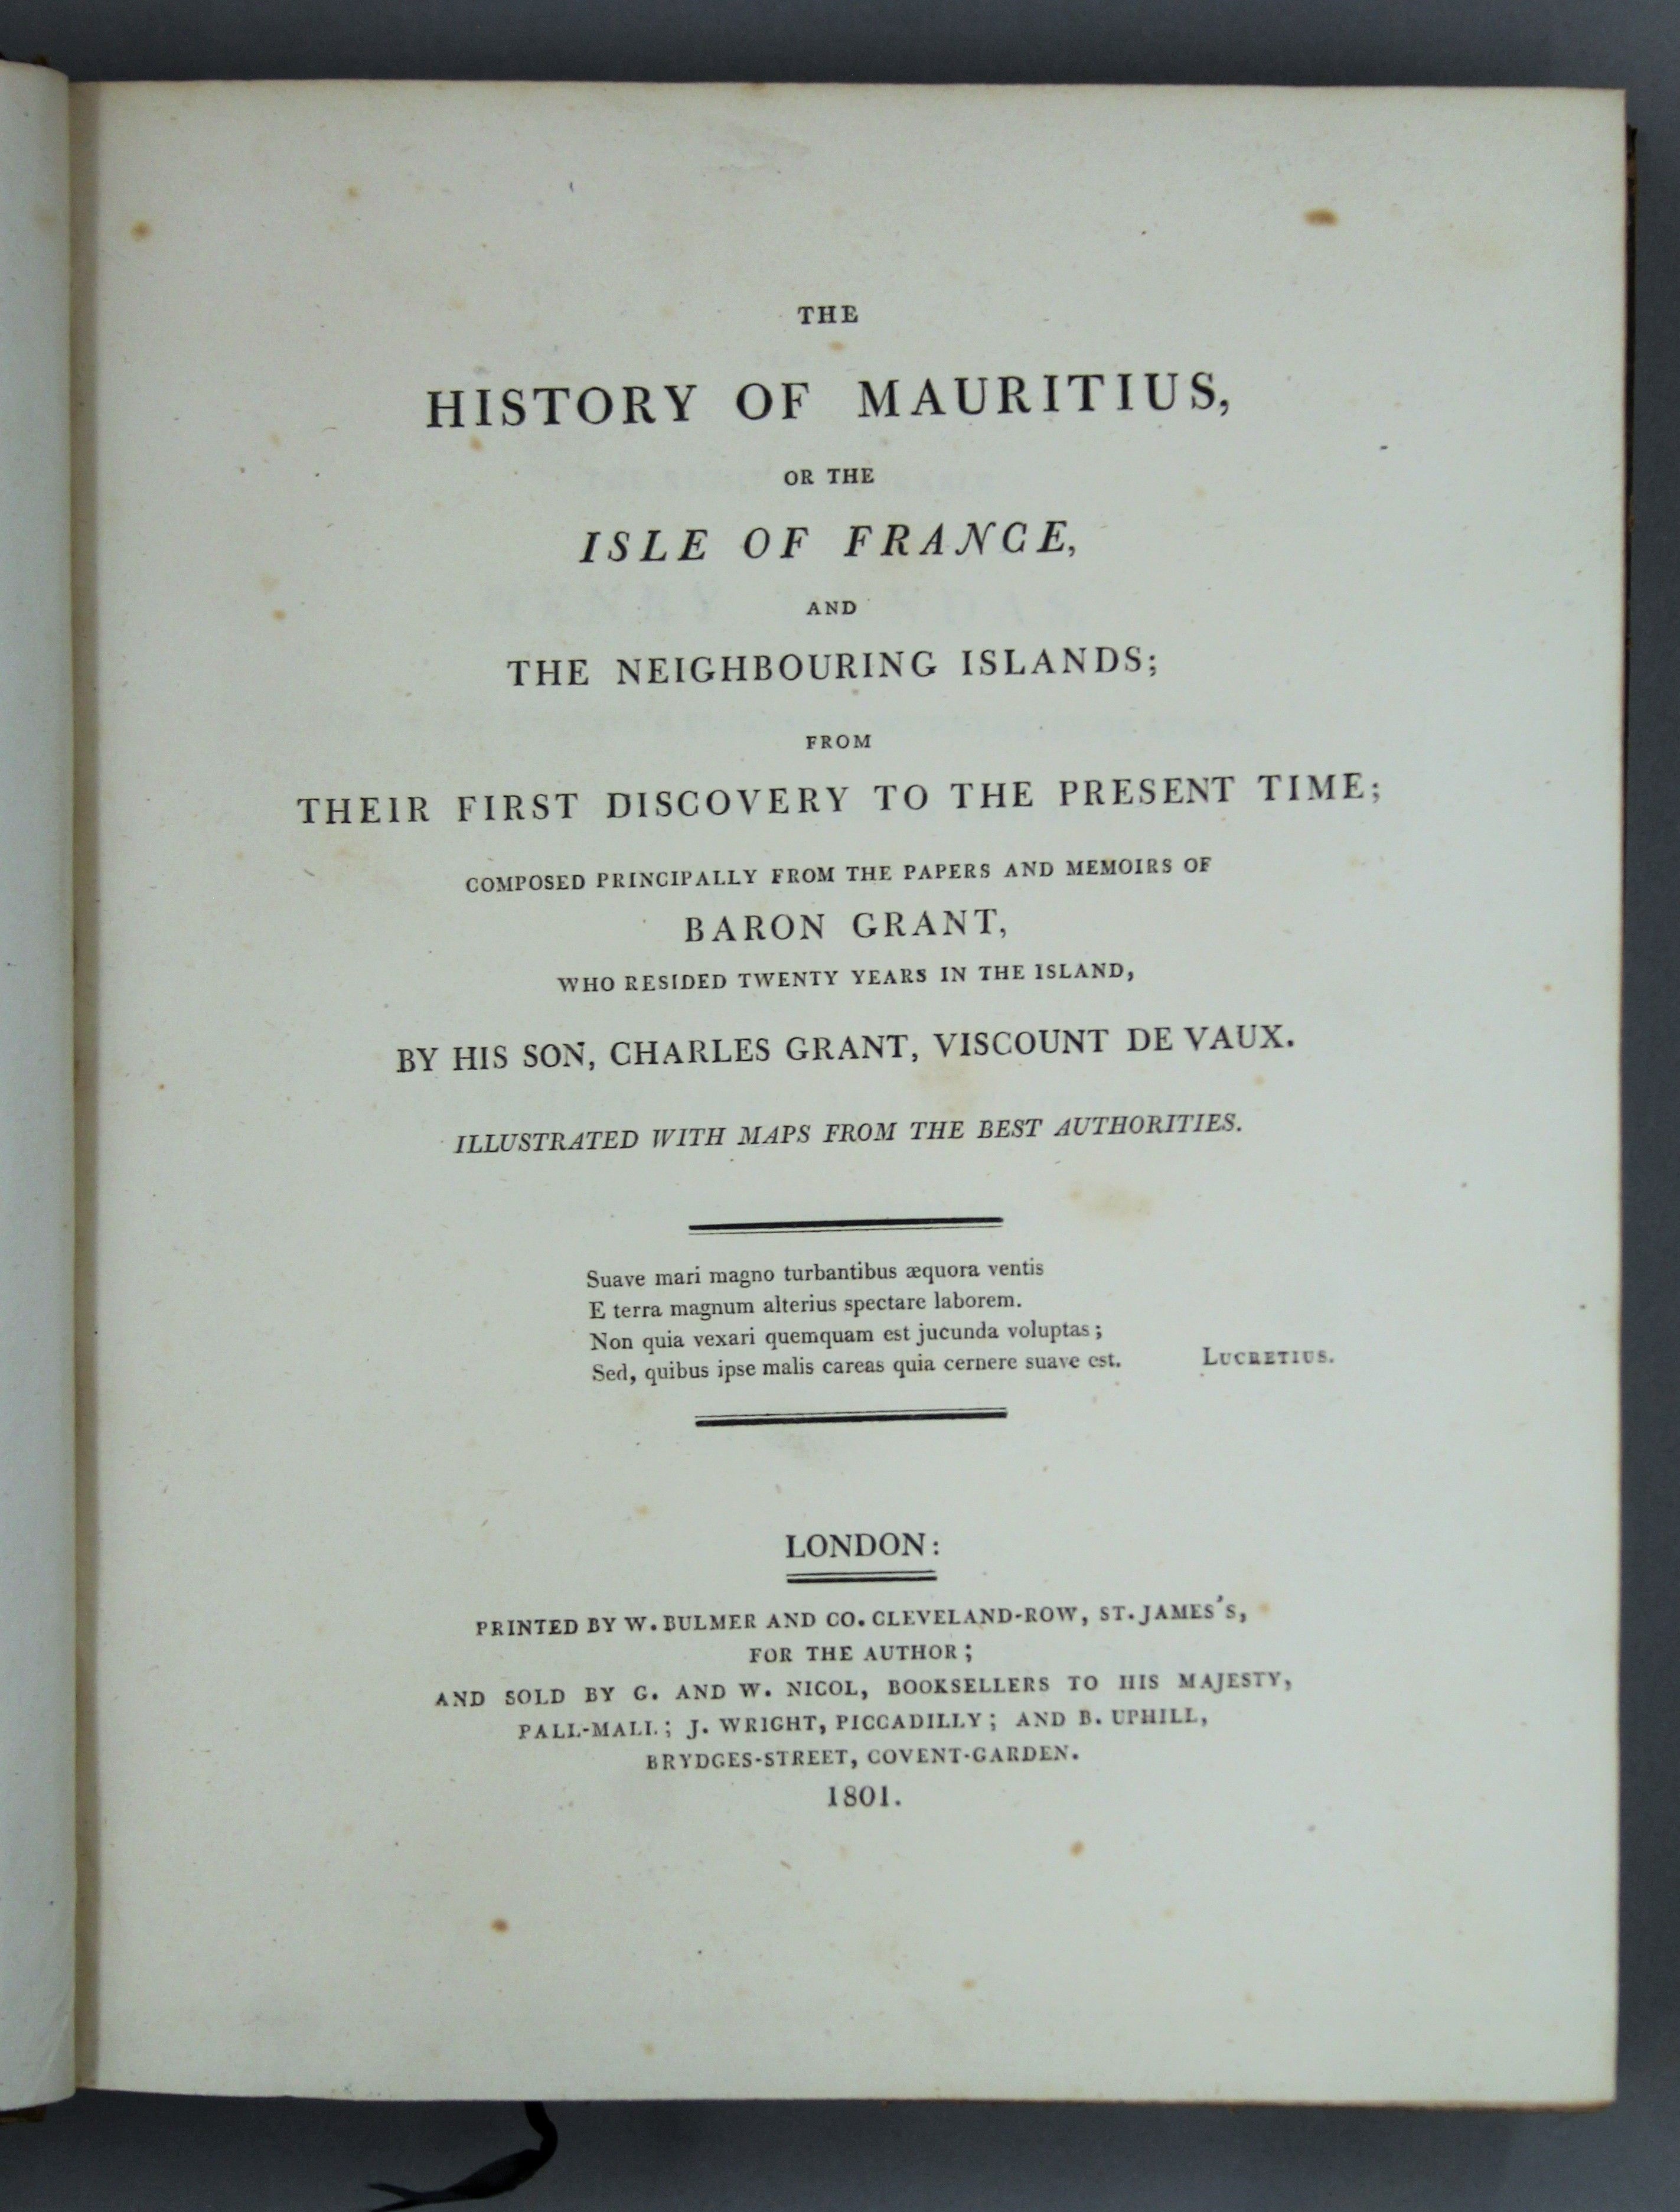 Grant (Charles), The History of Mauritius or the Isle of France and Neighbouring Islands, - Image 6 of 8